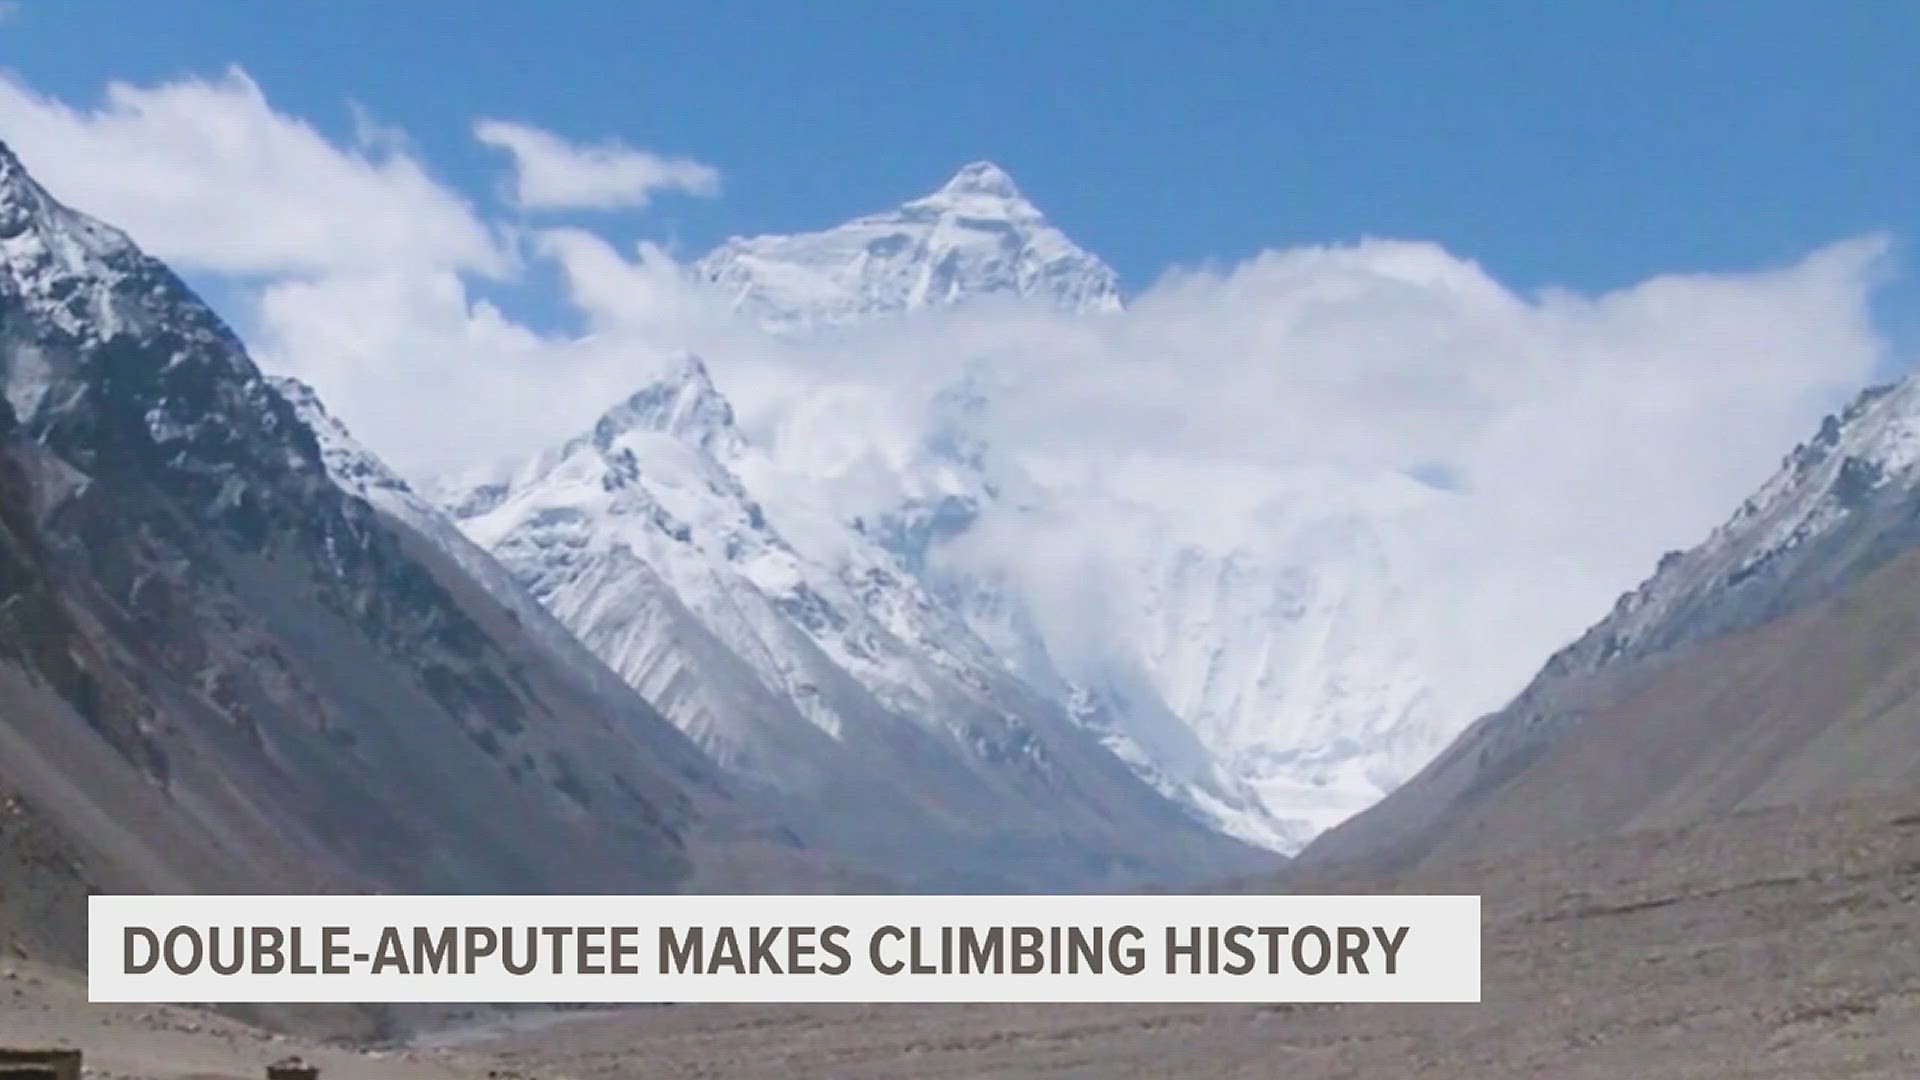 A double amputee Gurkha soldier climbs Mount Everest, the world's tallest mountain.